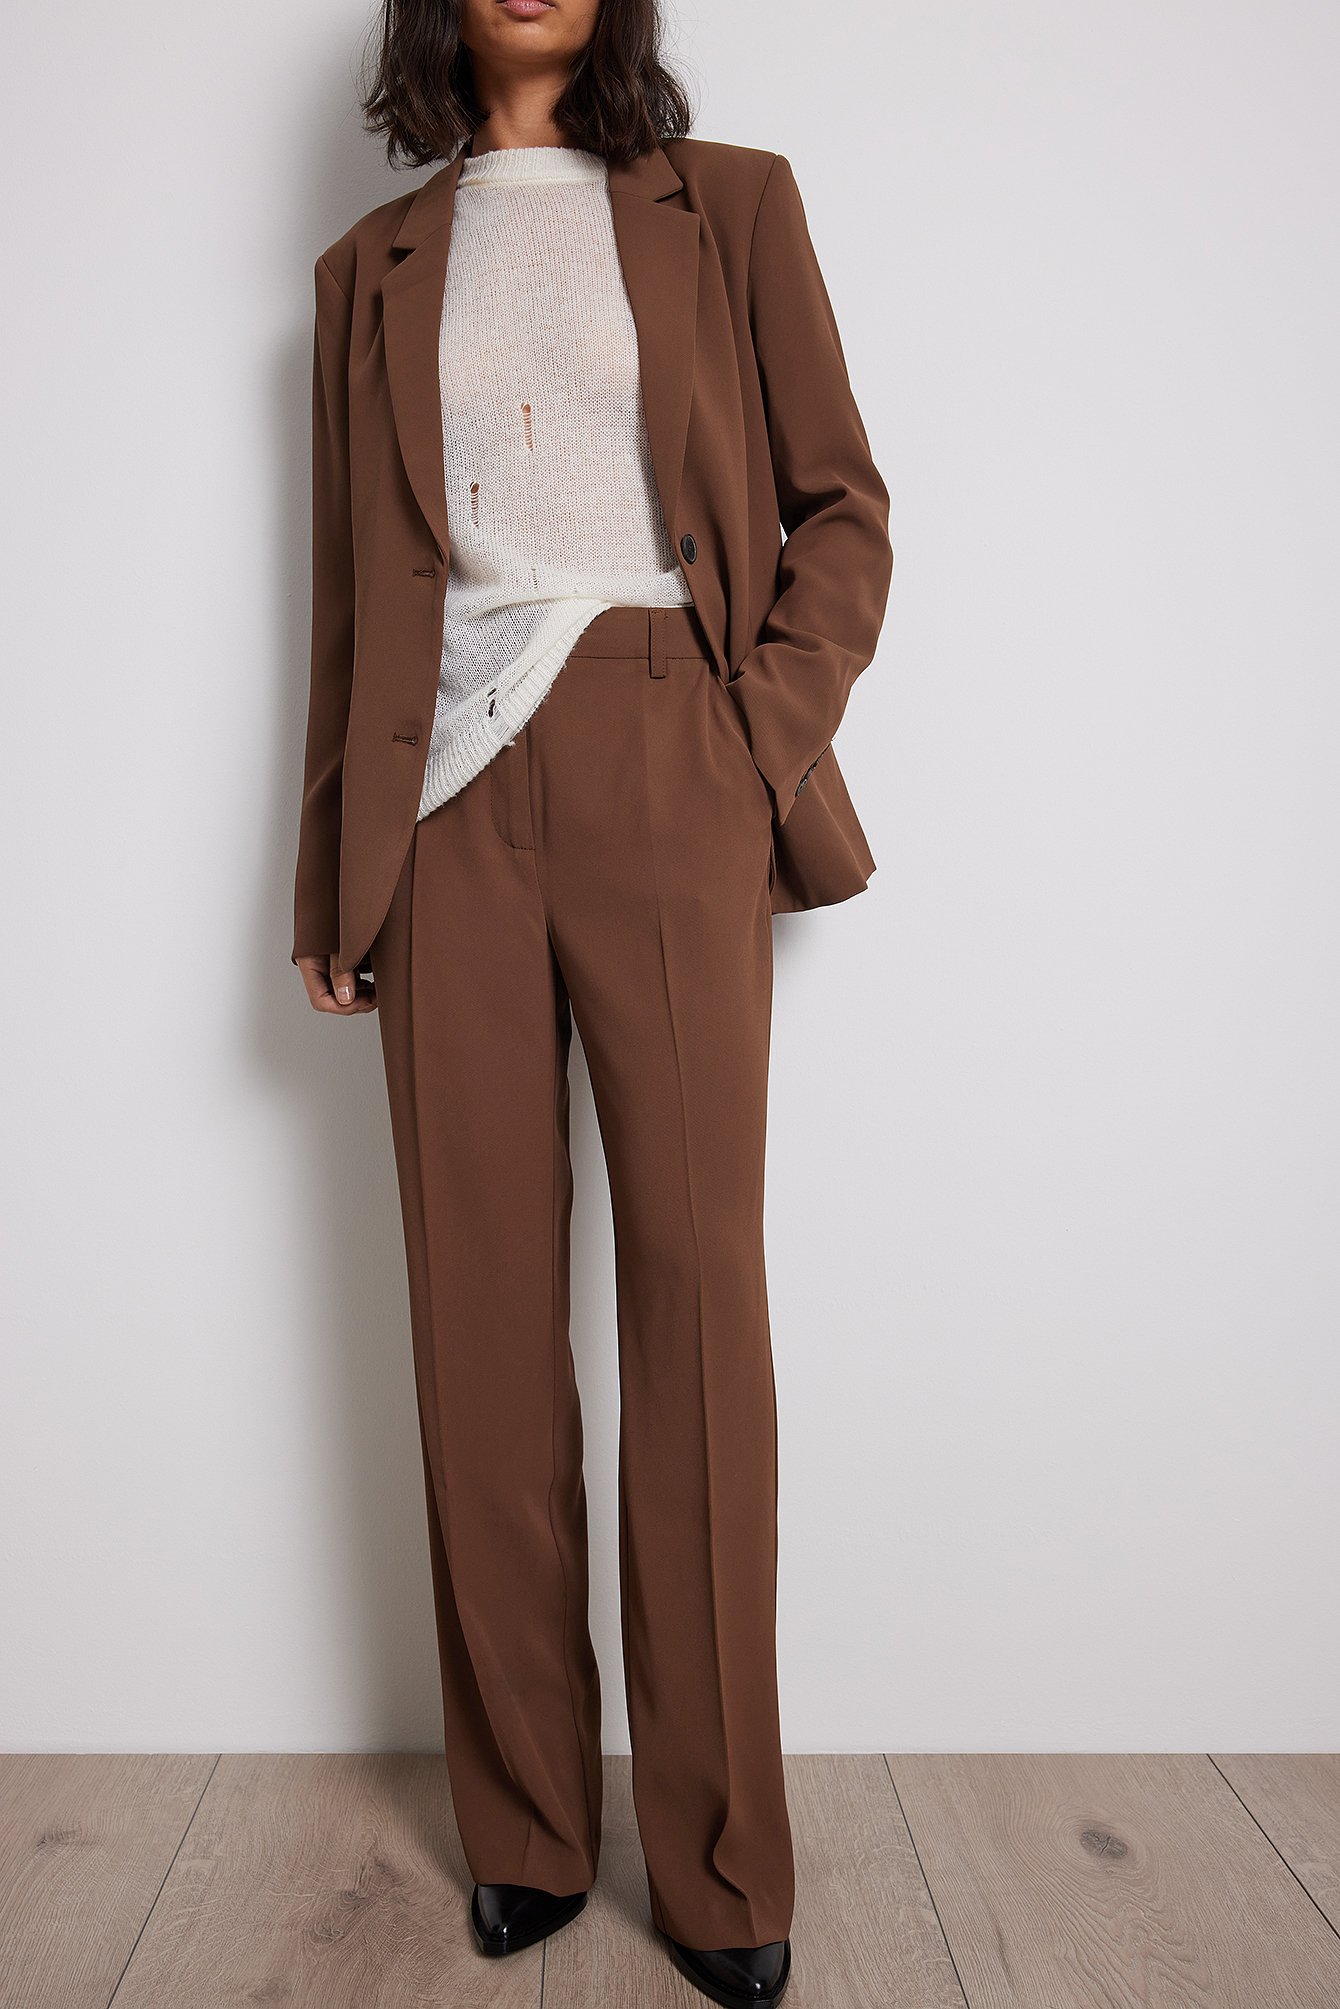 Wide Leg Pants for Women Linen Long Straight Suit Pants High Elastic  Waisted in The Back Business Work Trousers Brown at Amazon Women's Clothing  store